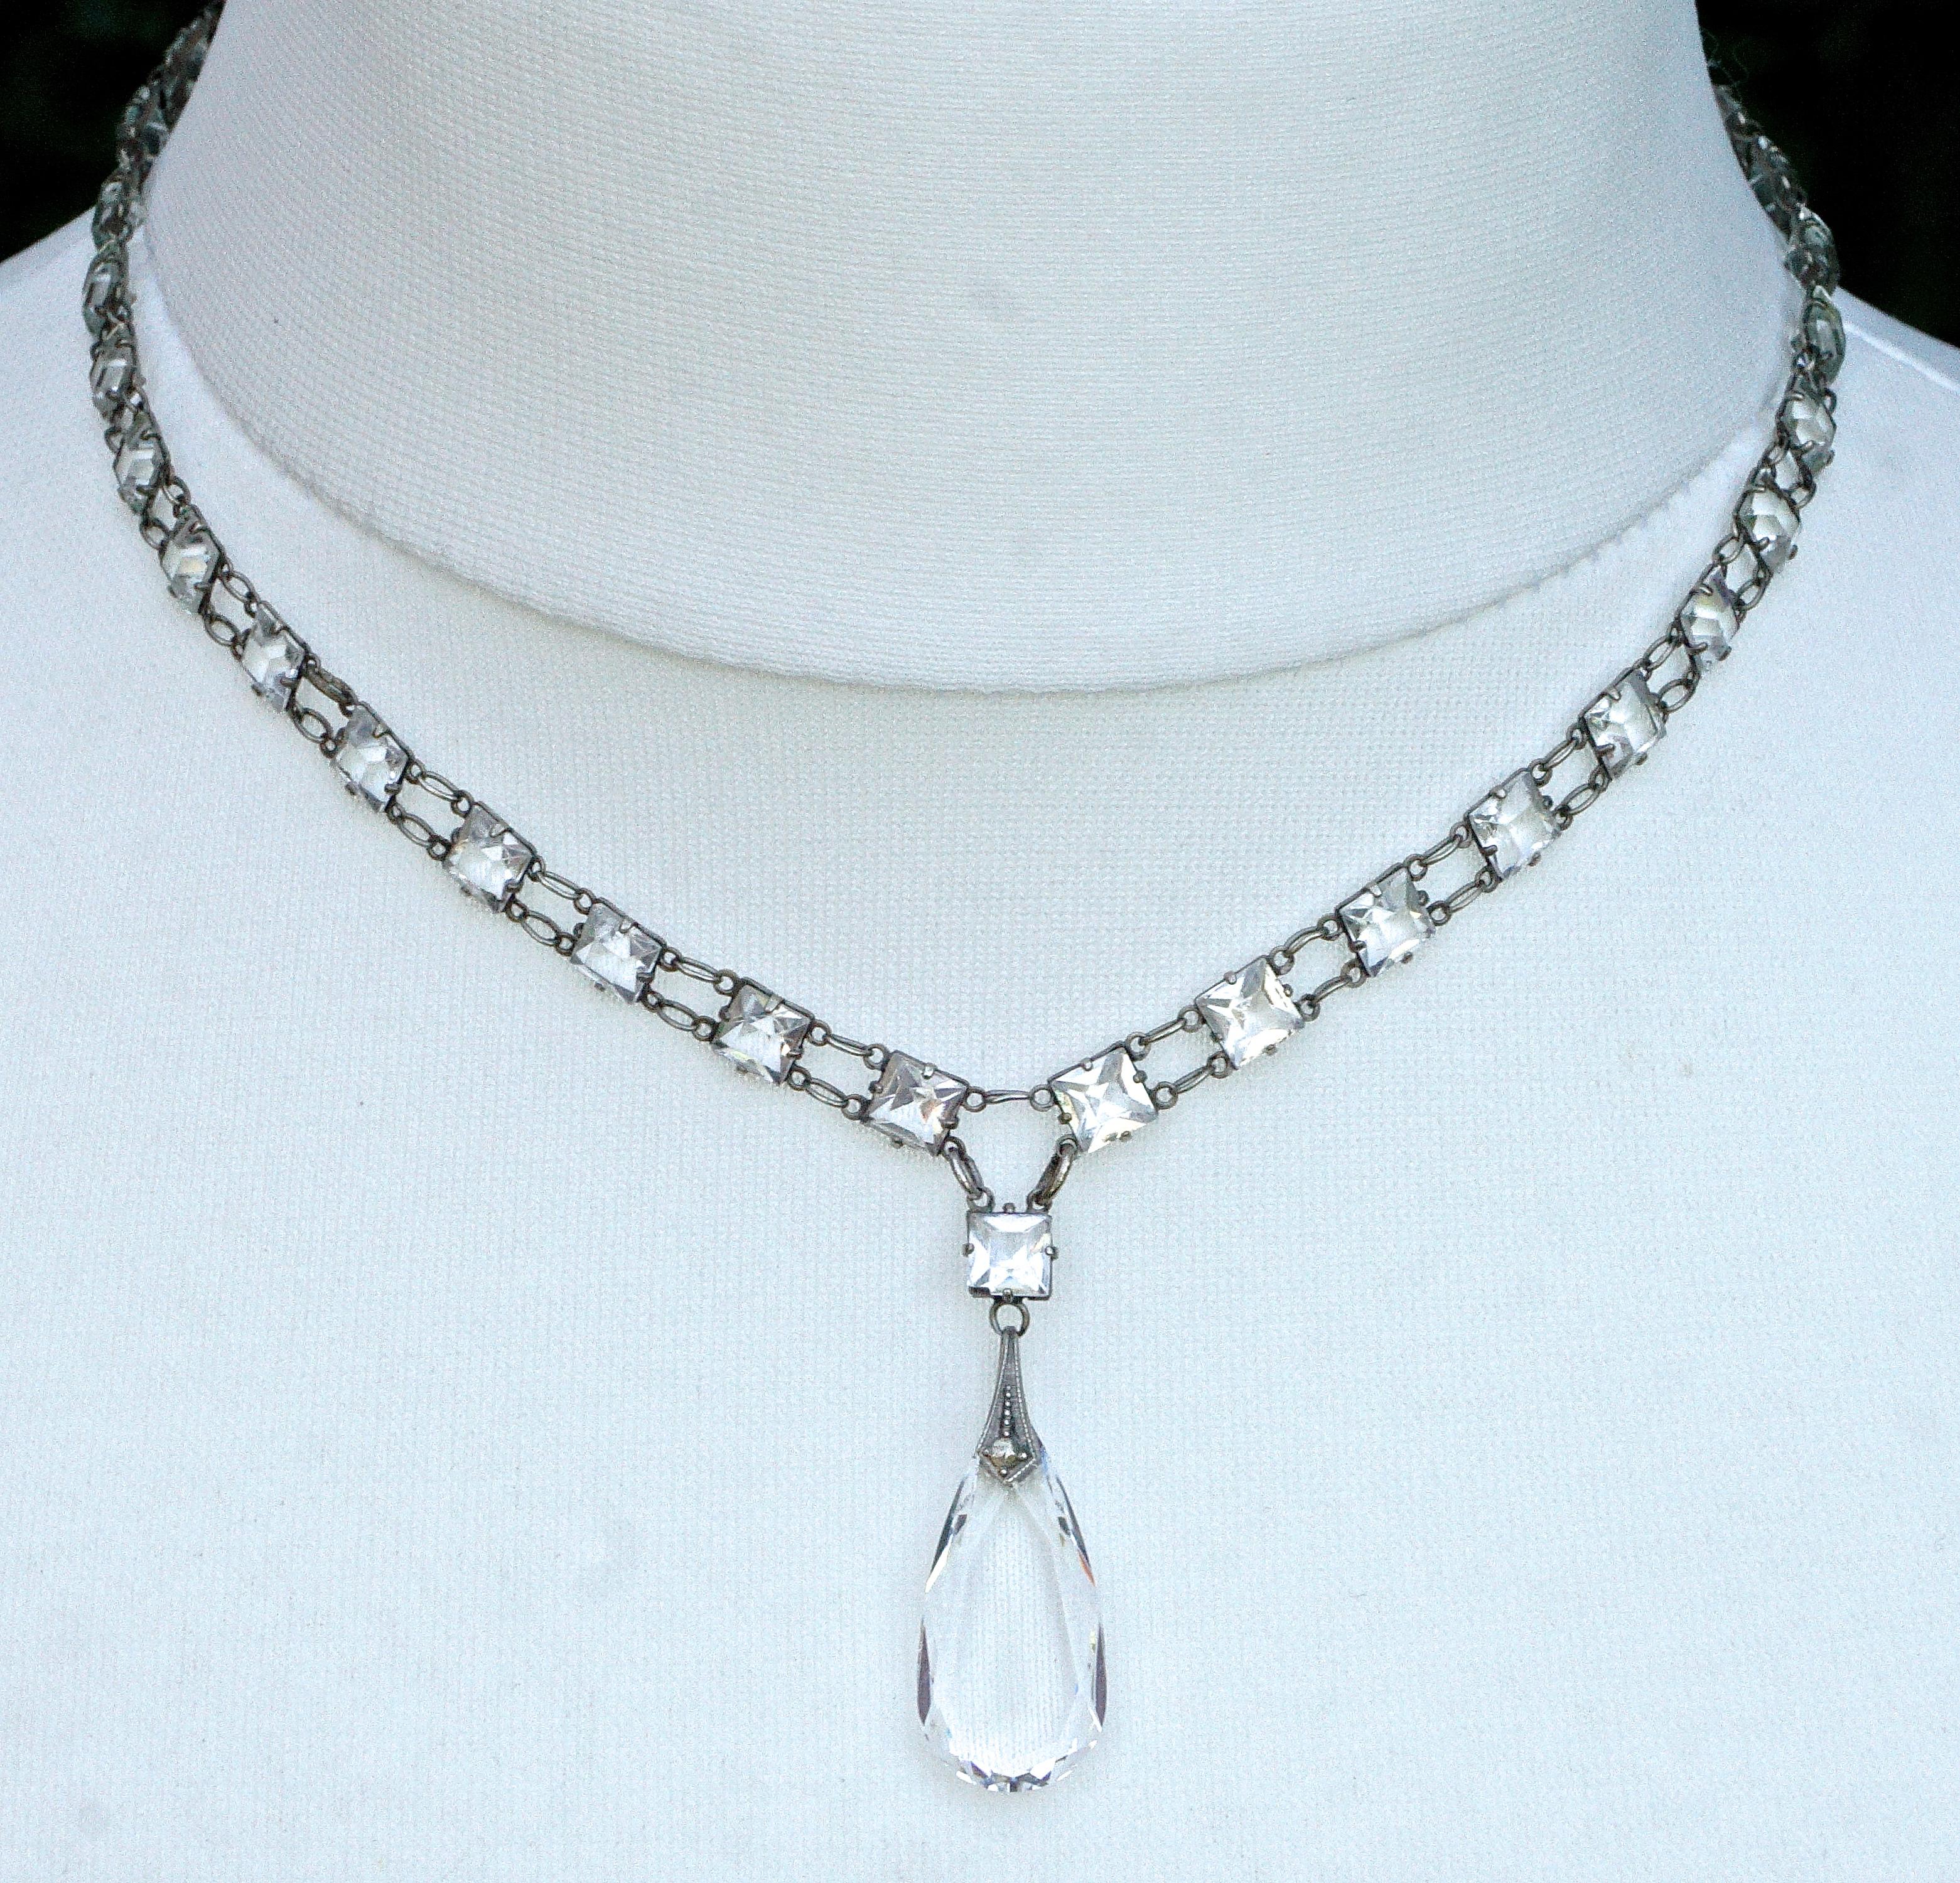 Art Deco silver tone link chain necklace featuring beautiful square clear glass crystals in open back settings, and a lovely faceted teardrop pendant. The spring bolt clasp is sterling silver. The faceted crystals are raised at the front and pointed